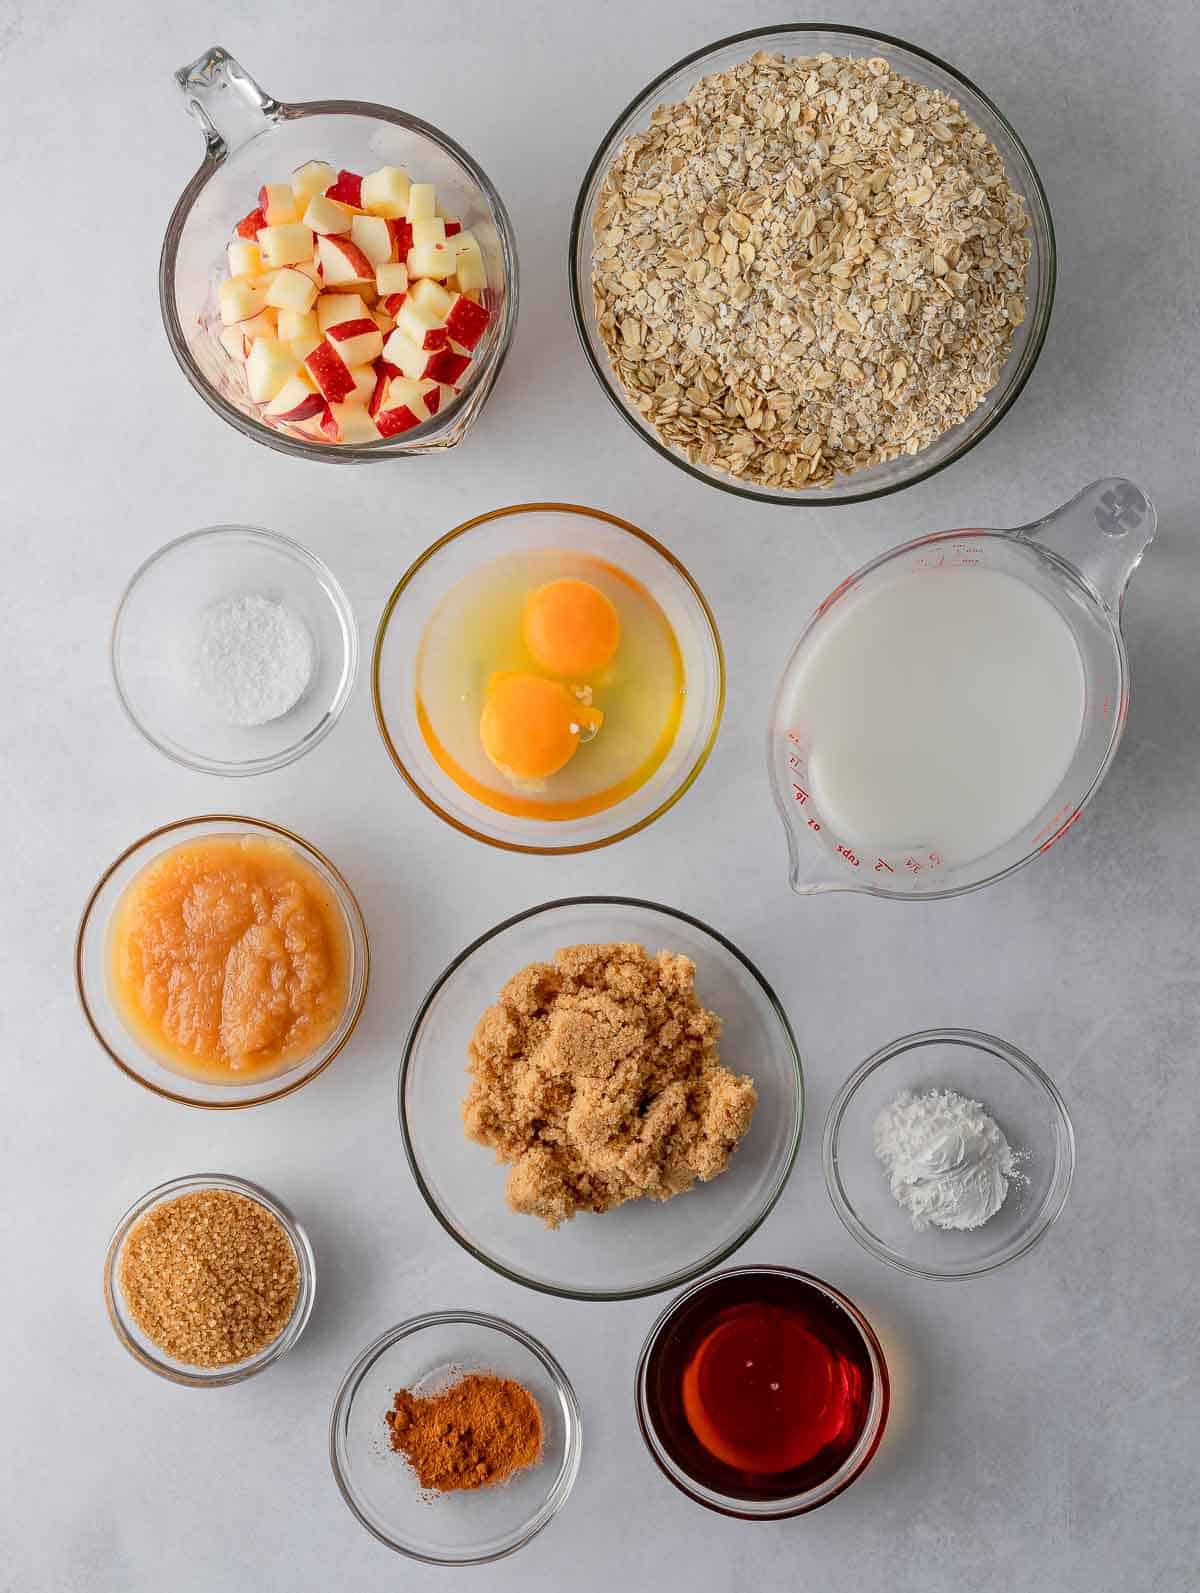 Ingredients needed to make cinnamon baked apple oats cups.